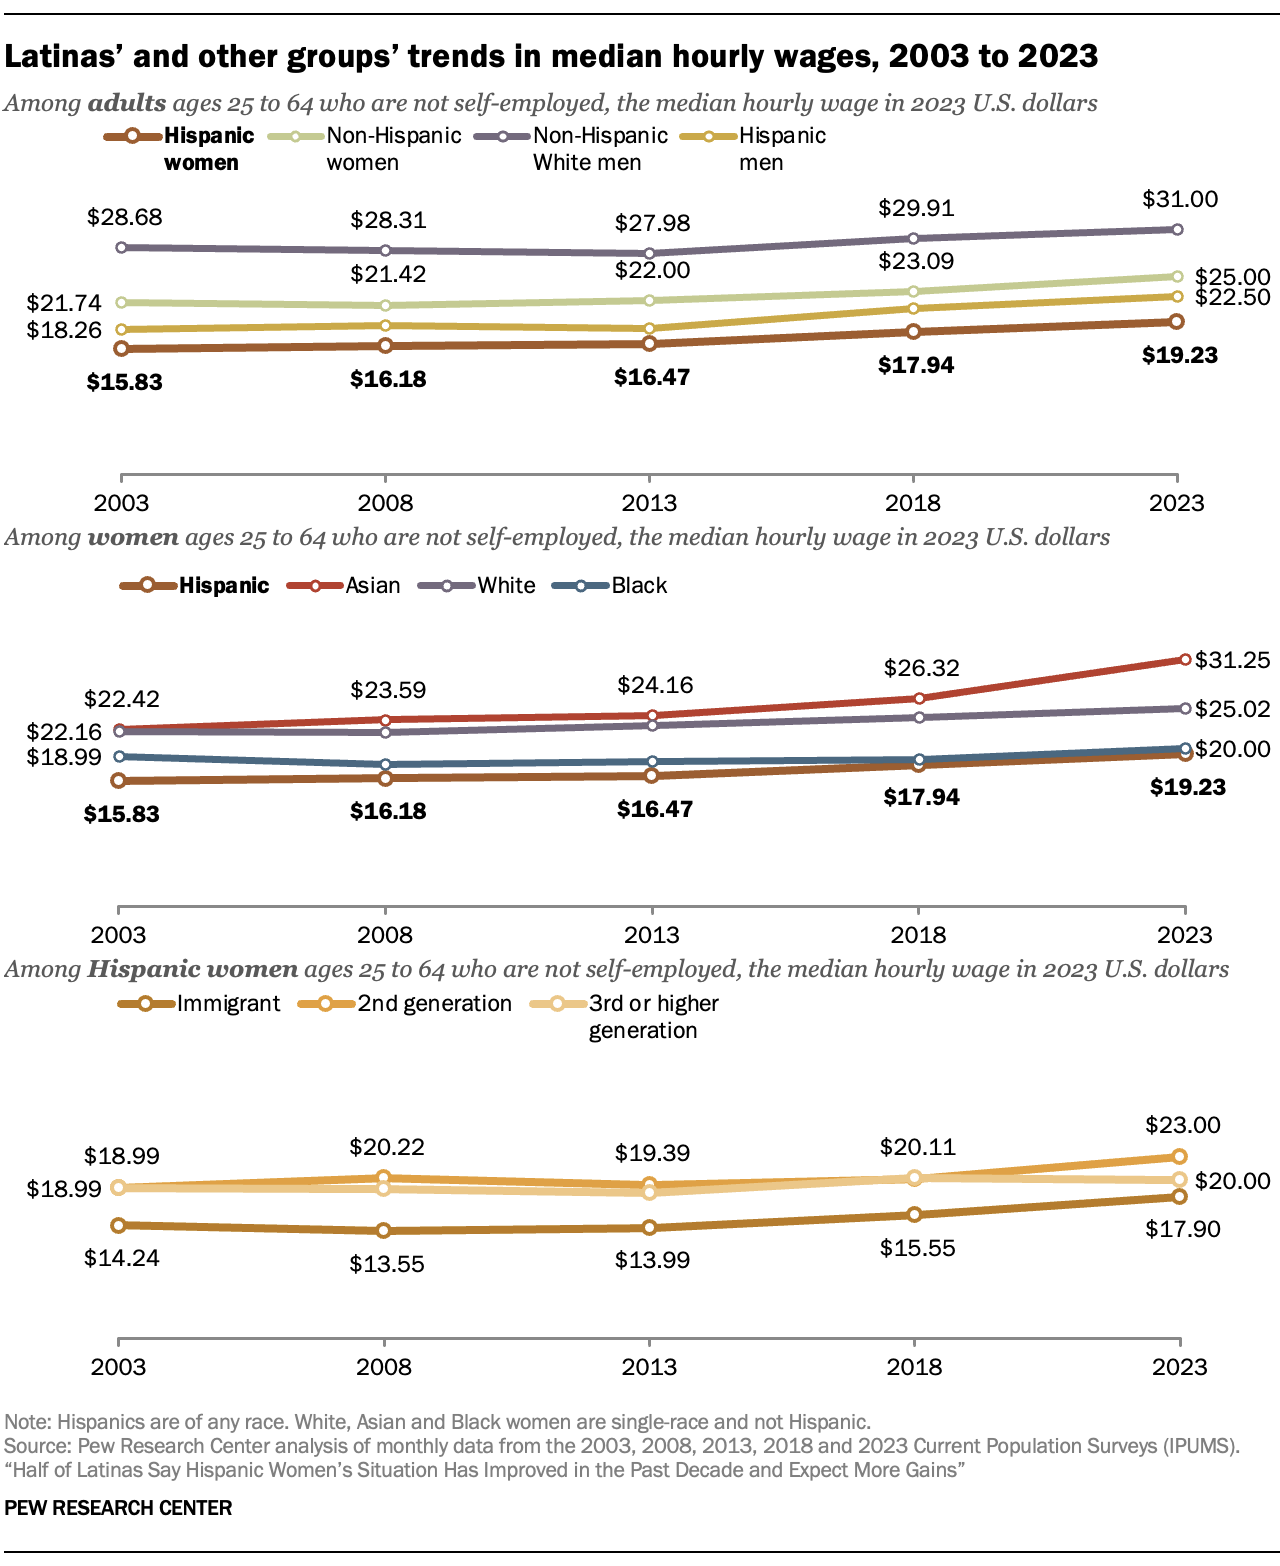 A series of line graphs showing Latinas’ and other groups’ trends in median hourly wages from 2003 to 2023.